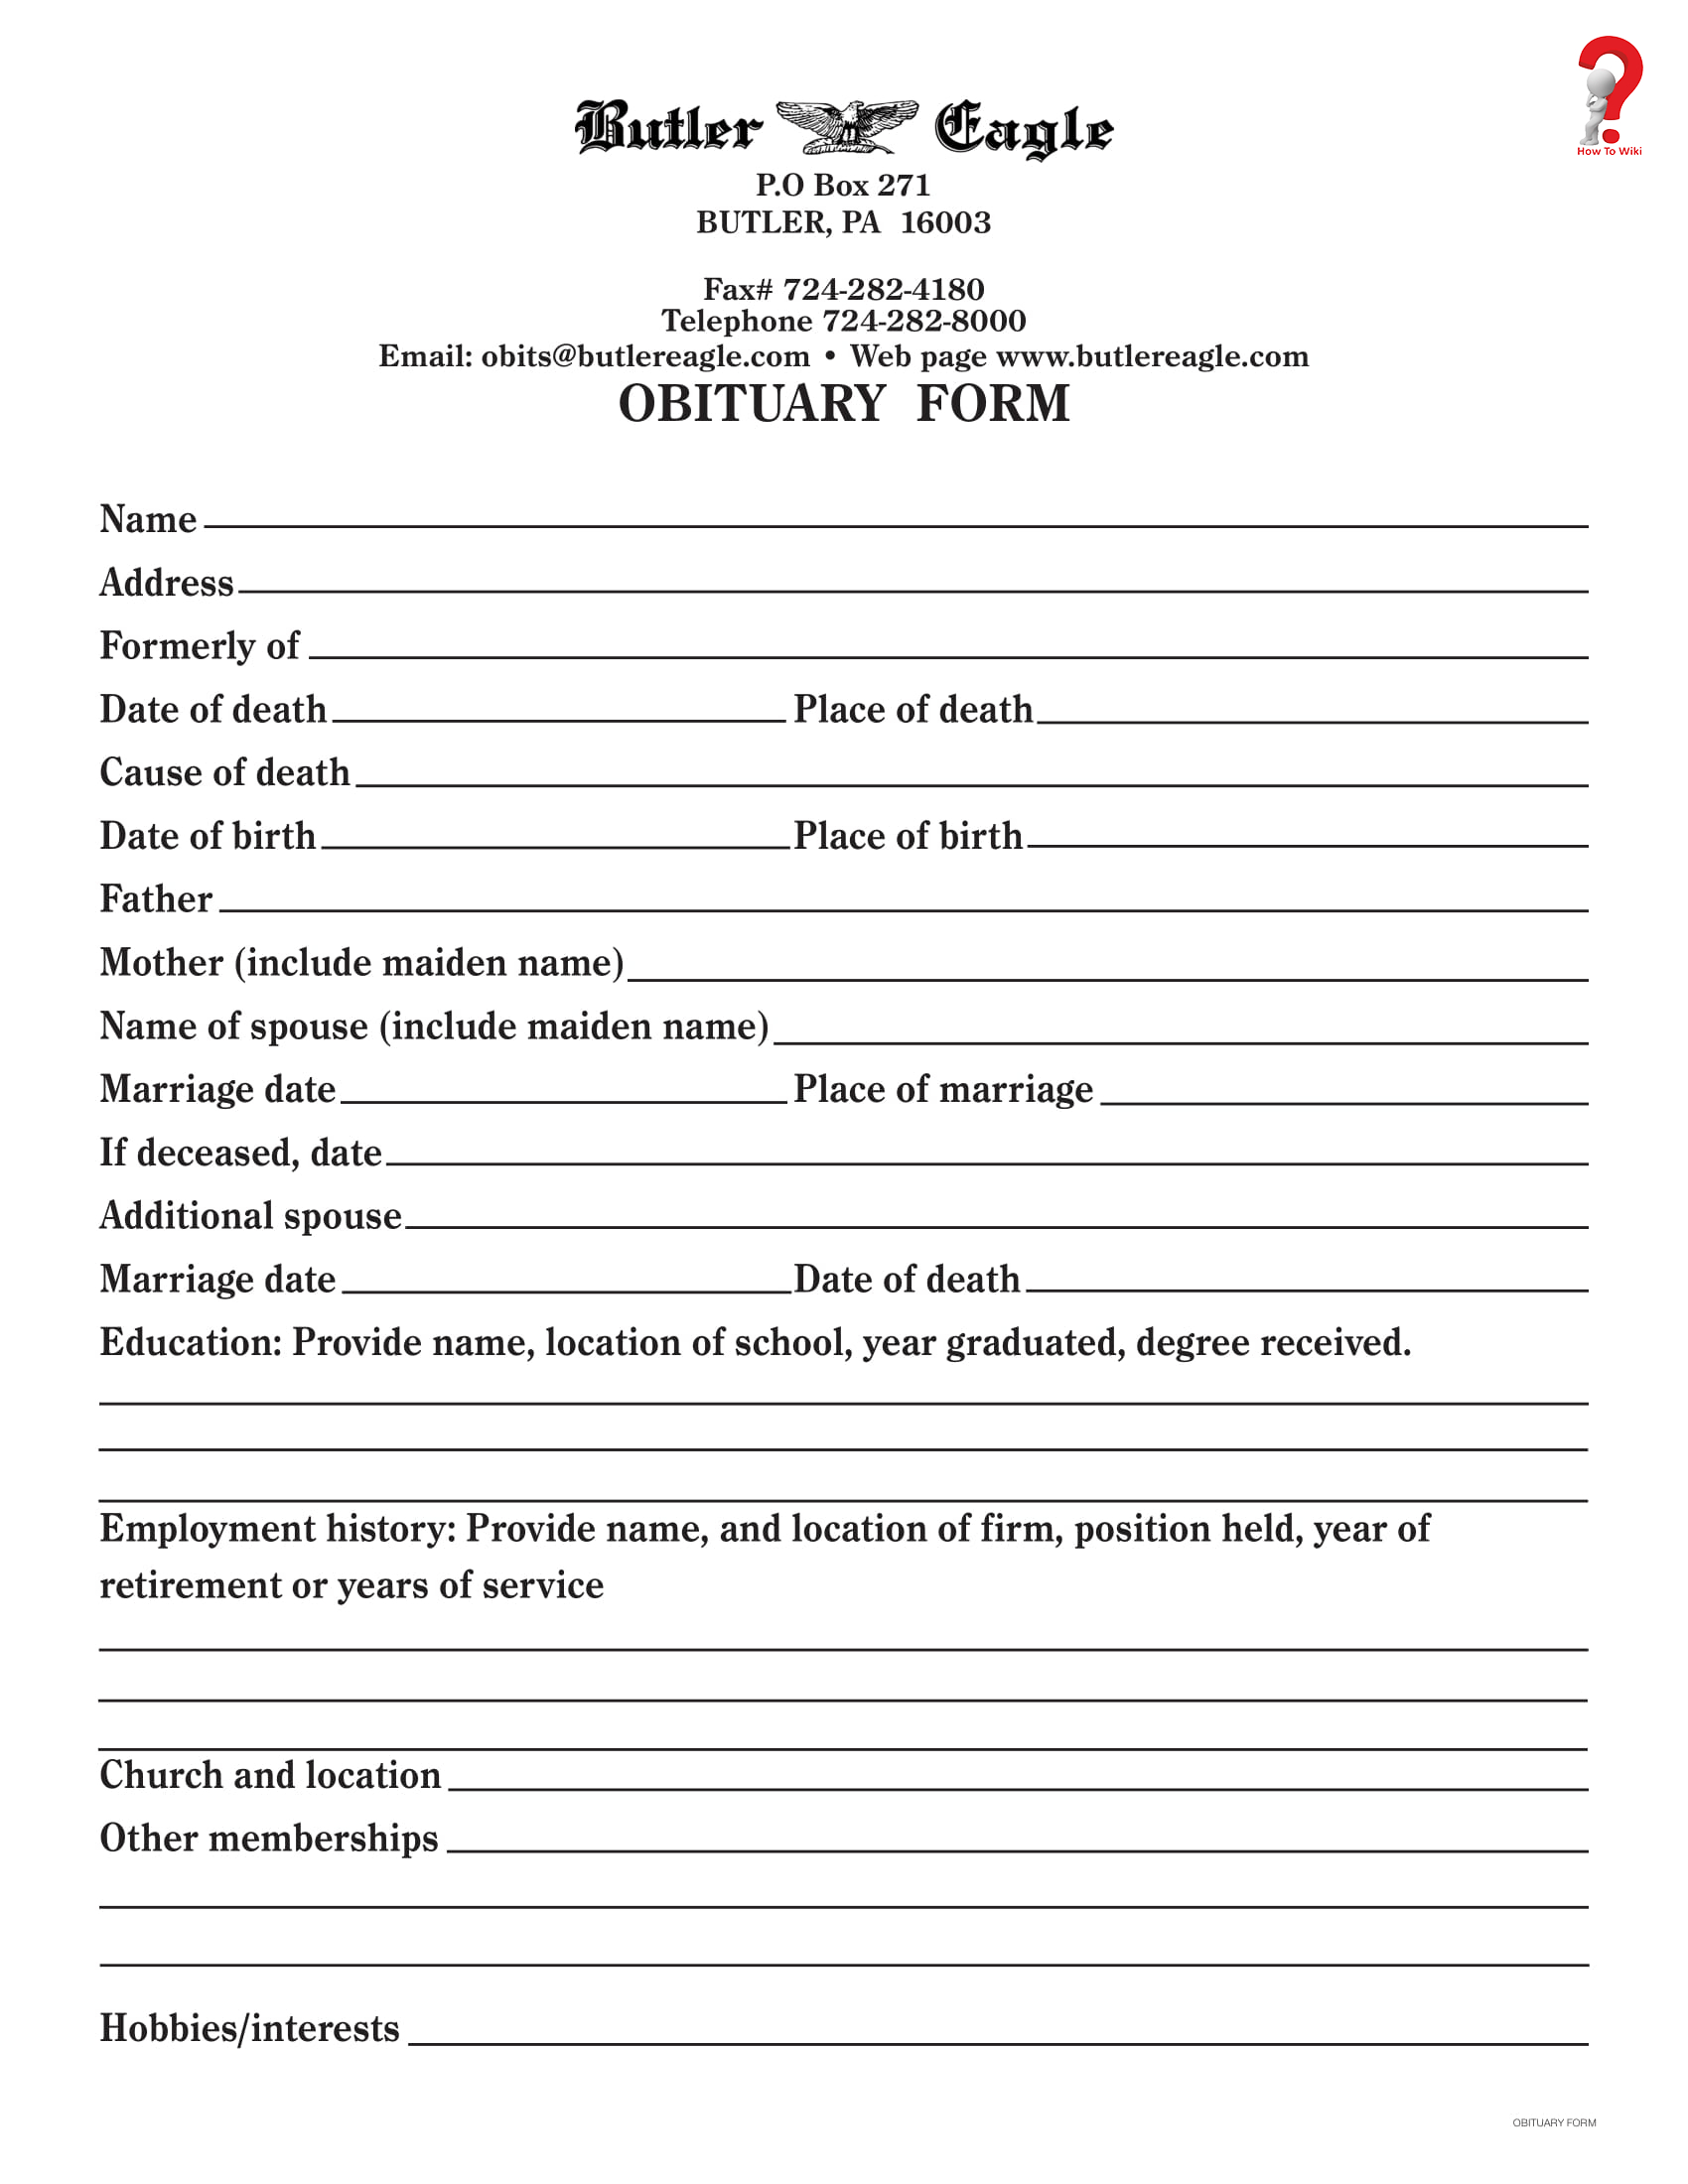 How To Write An Obituary Template In Simple Steps | How To Wiki Within Fill In The Blank Obituary Template